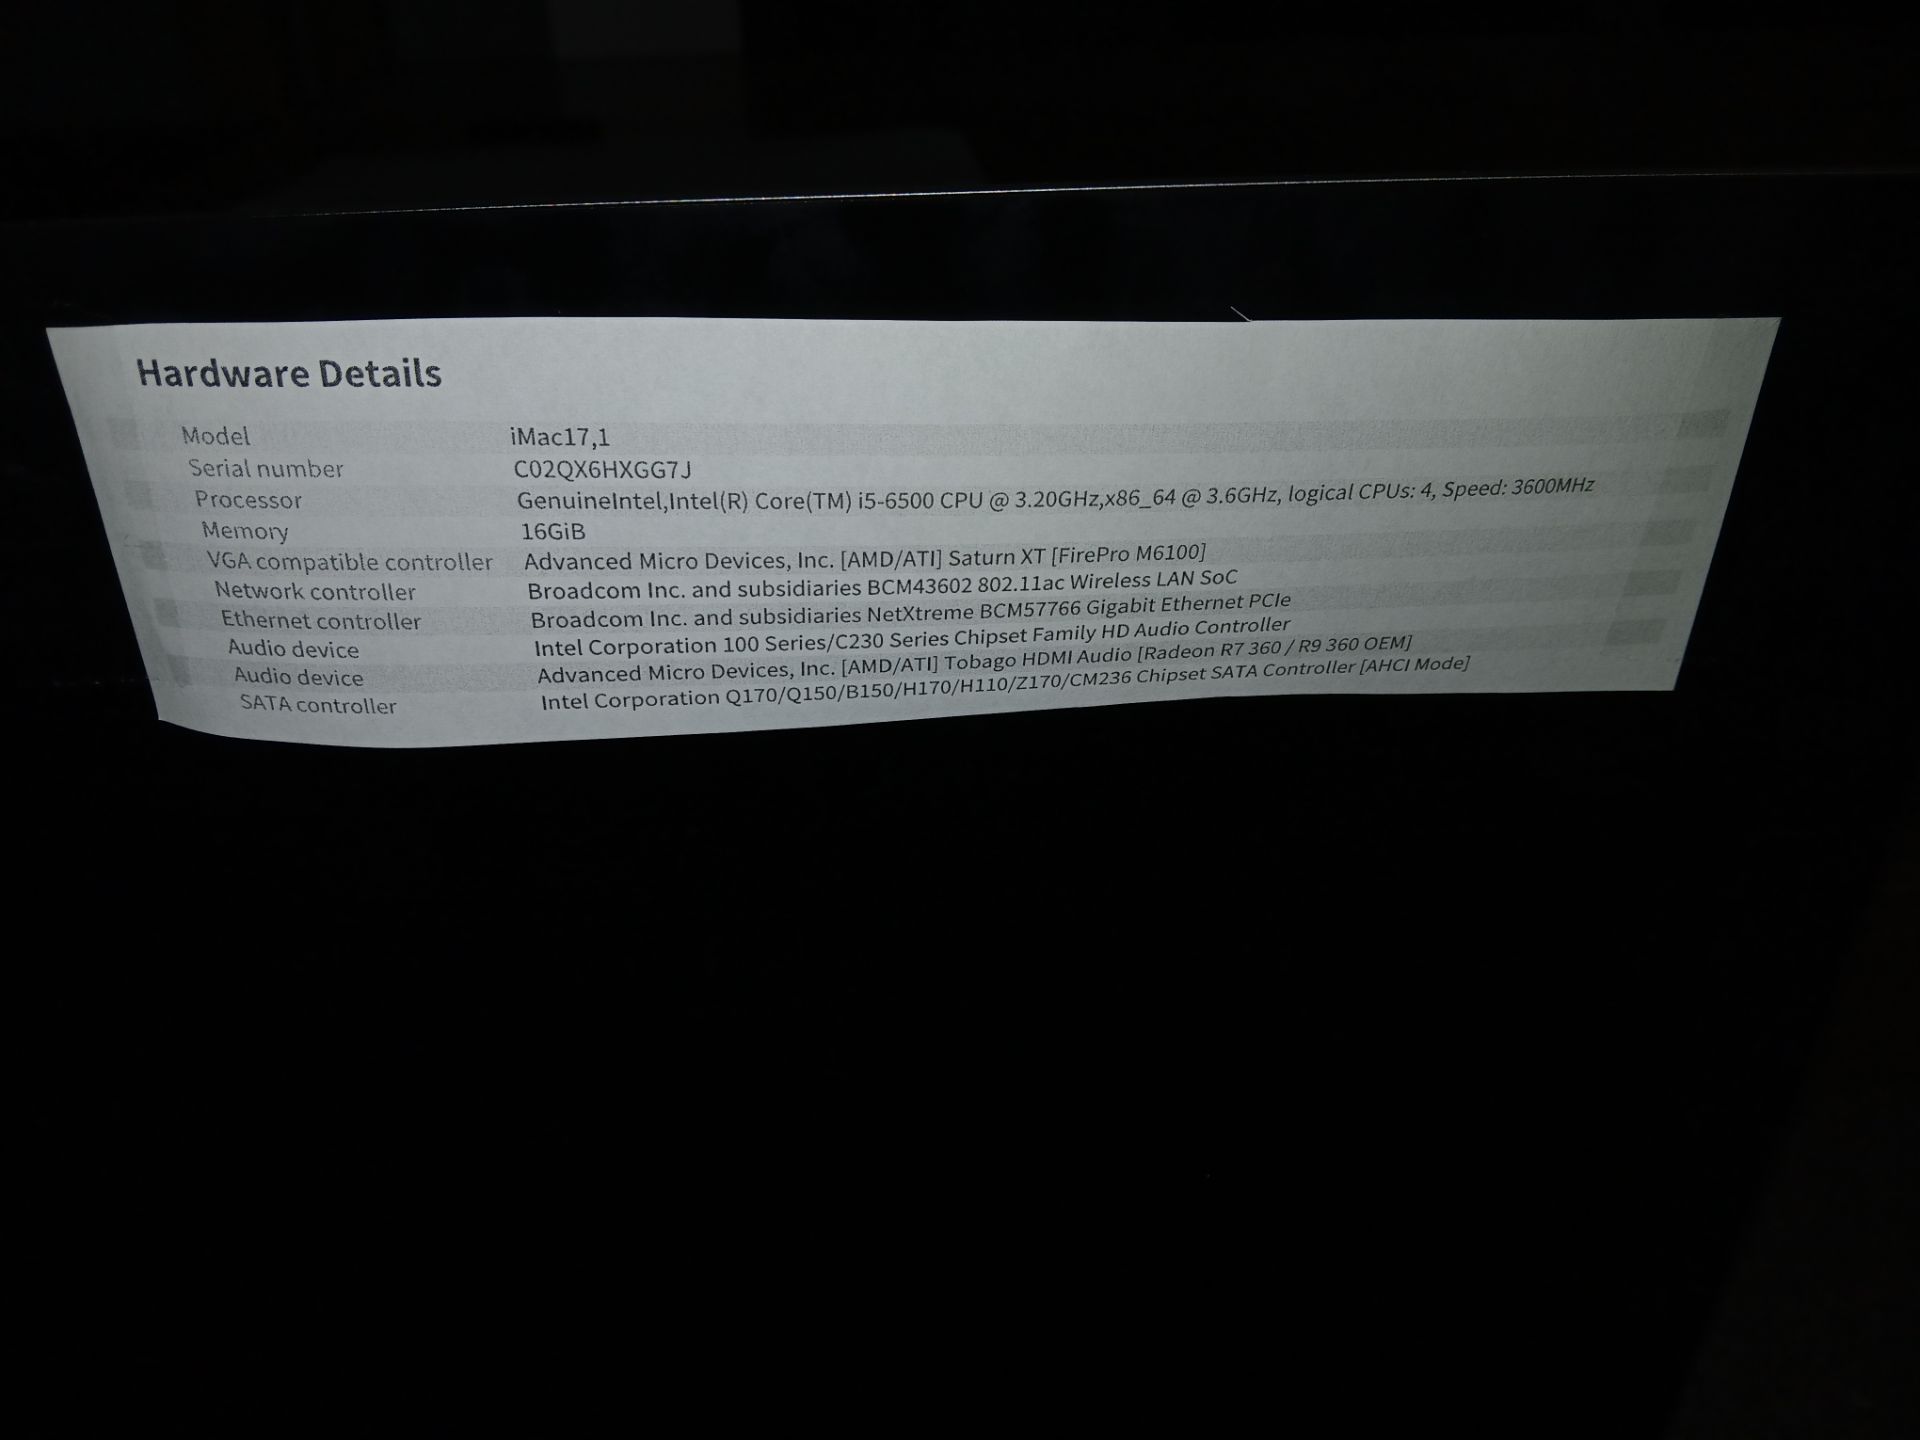 Apple iMac (Retina 5K, 27”, Late 2015) with Power Cable and Keyboard, Serial Number C02QX6HXGG7J ( - Image 3 of 3